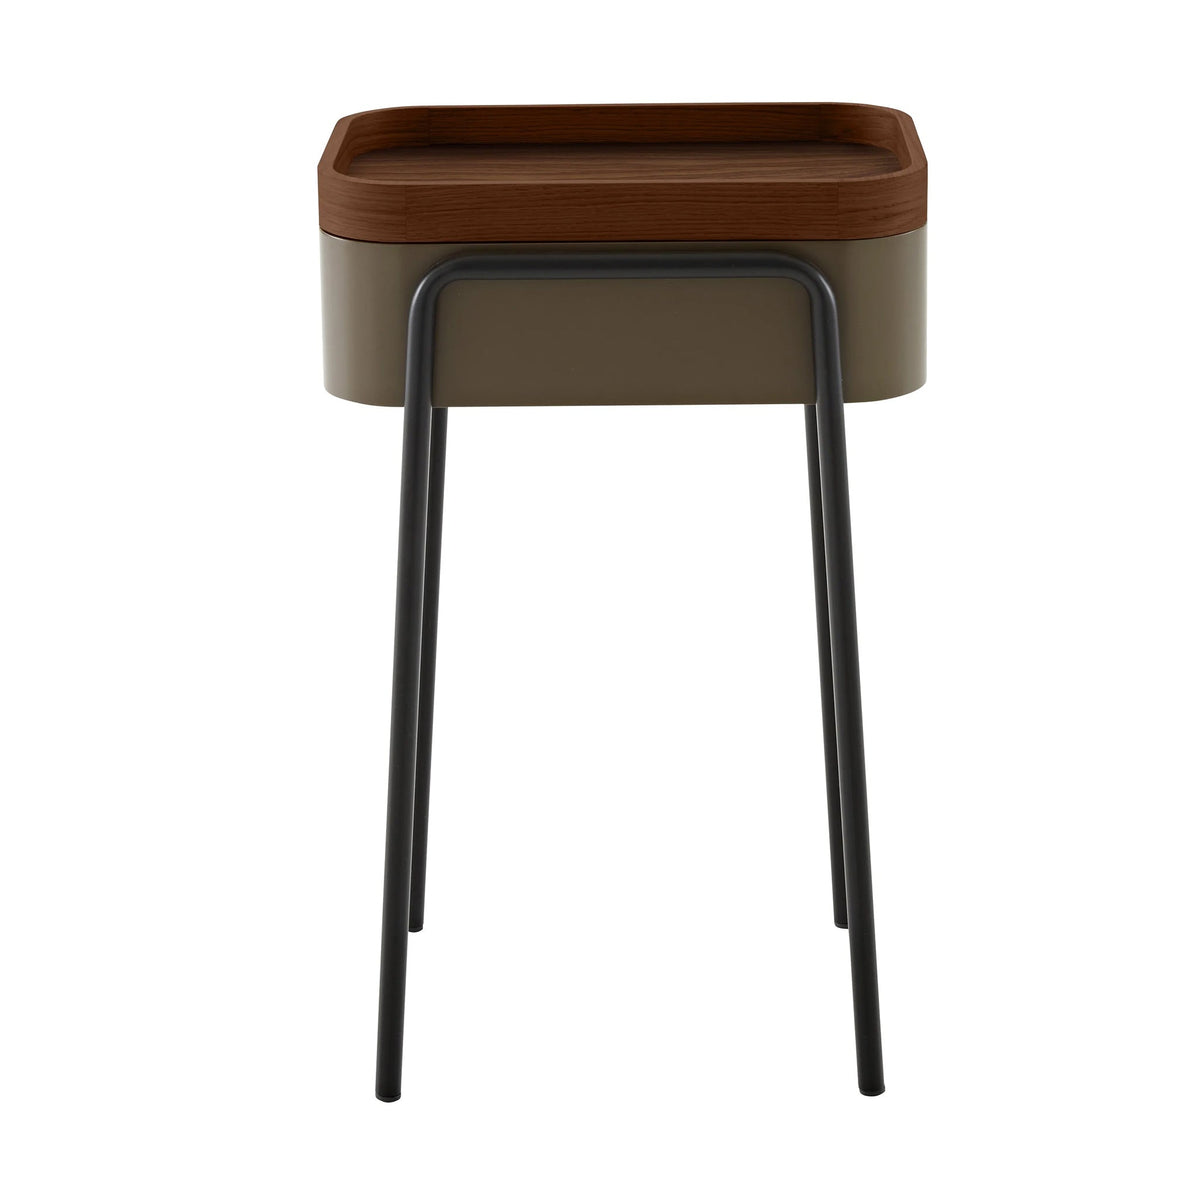 COULISS END TABLE